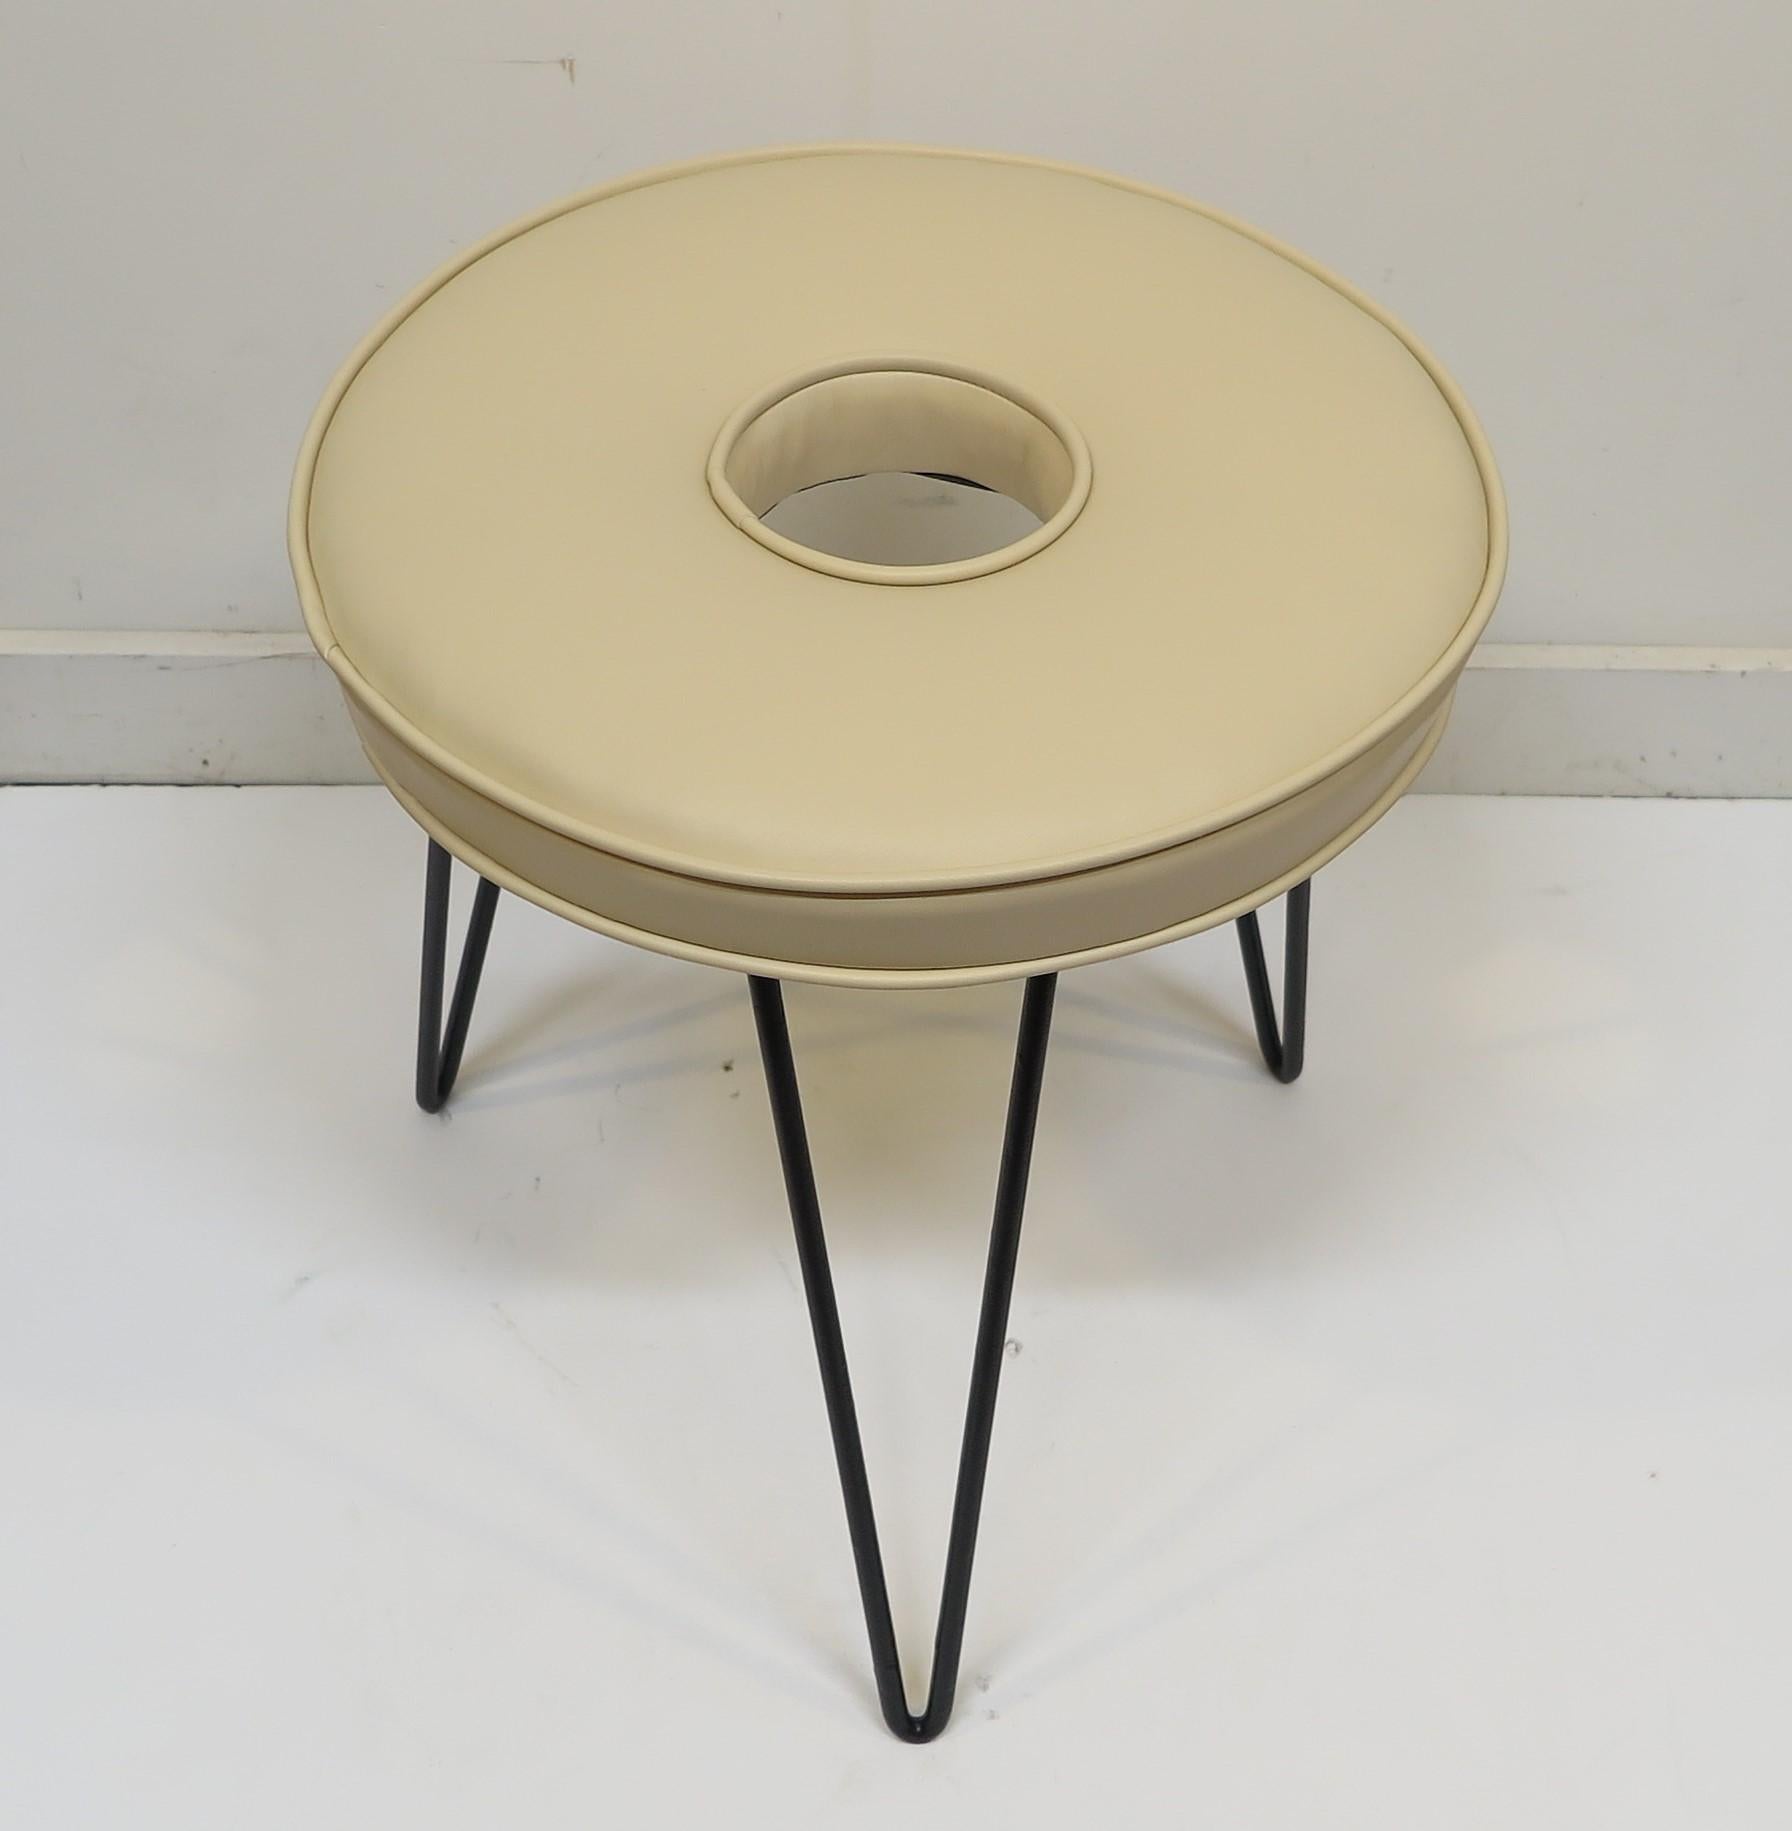 Mid-Century Modern stool. William Armbruster Donut stool. Mid Century Modern Donut stool designed by William Armbruster for Edgewood Furniture Co. The design was showcased in MOMA's 1950 Good Design Exhibition with a collection designed by